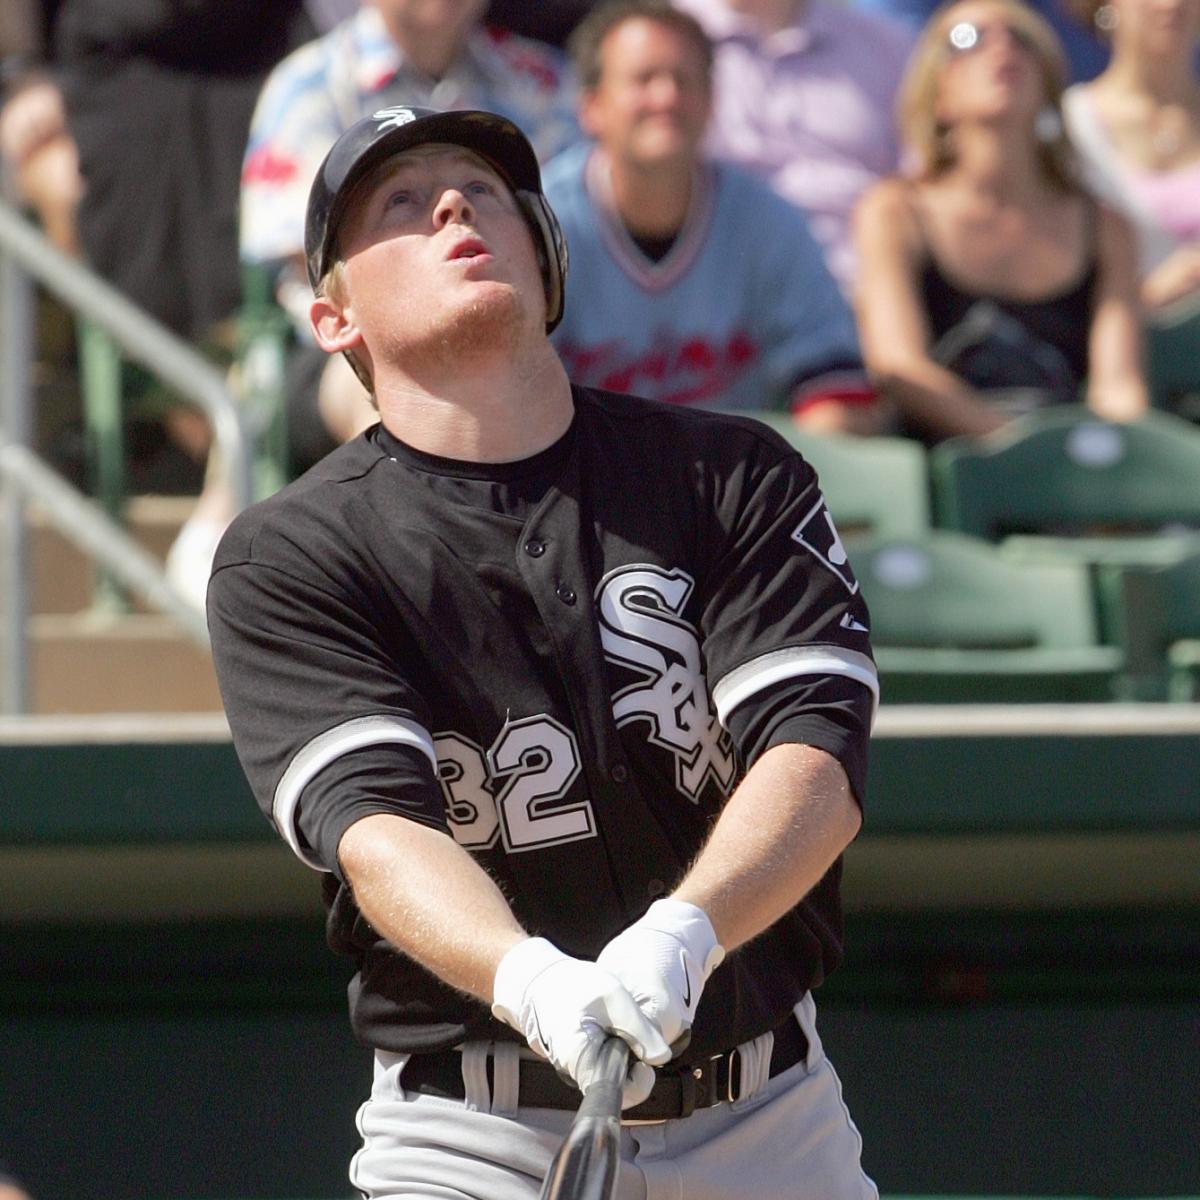 Crede joins White Sox injury list